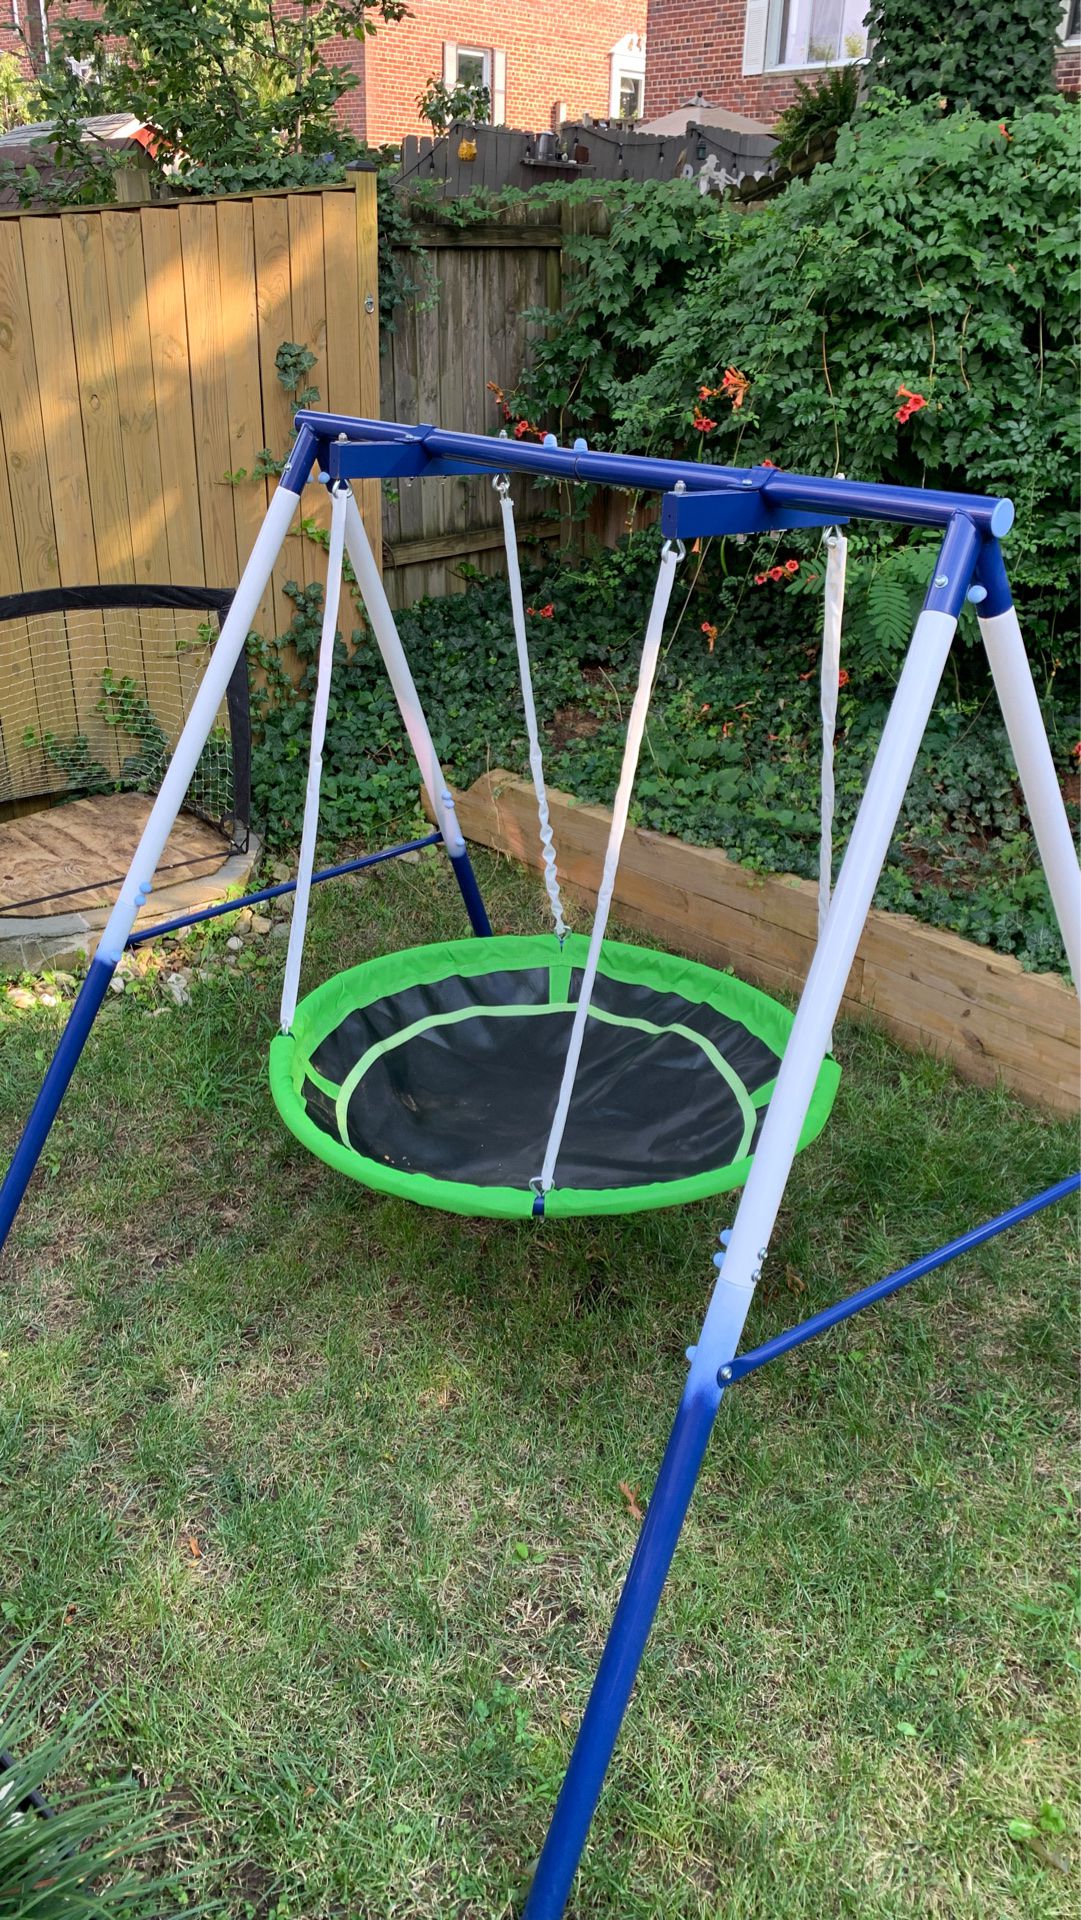 Saucer Swing - with full details